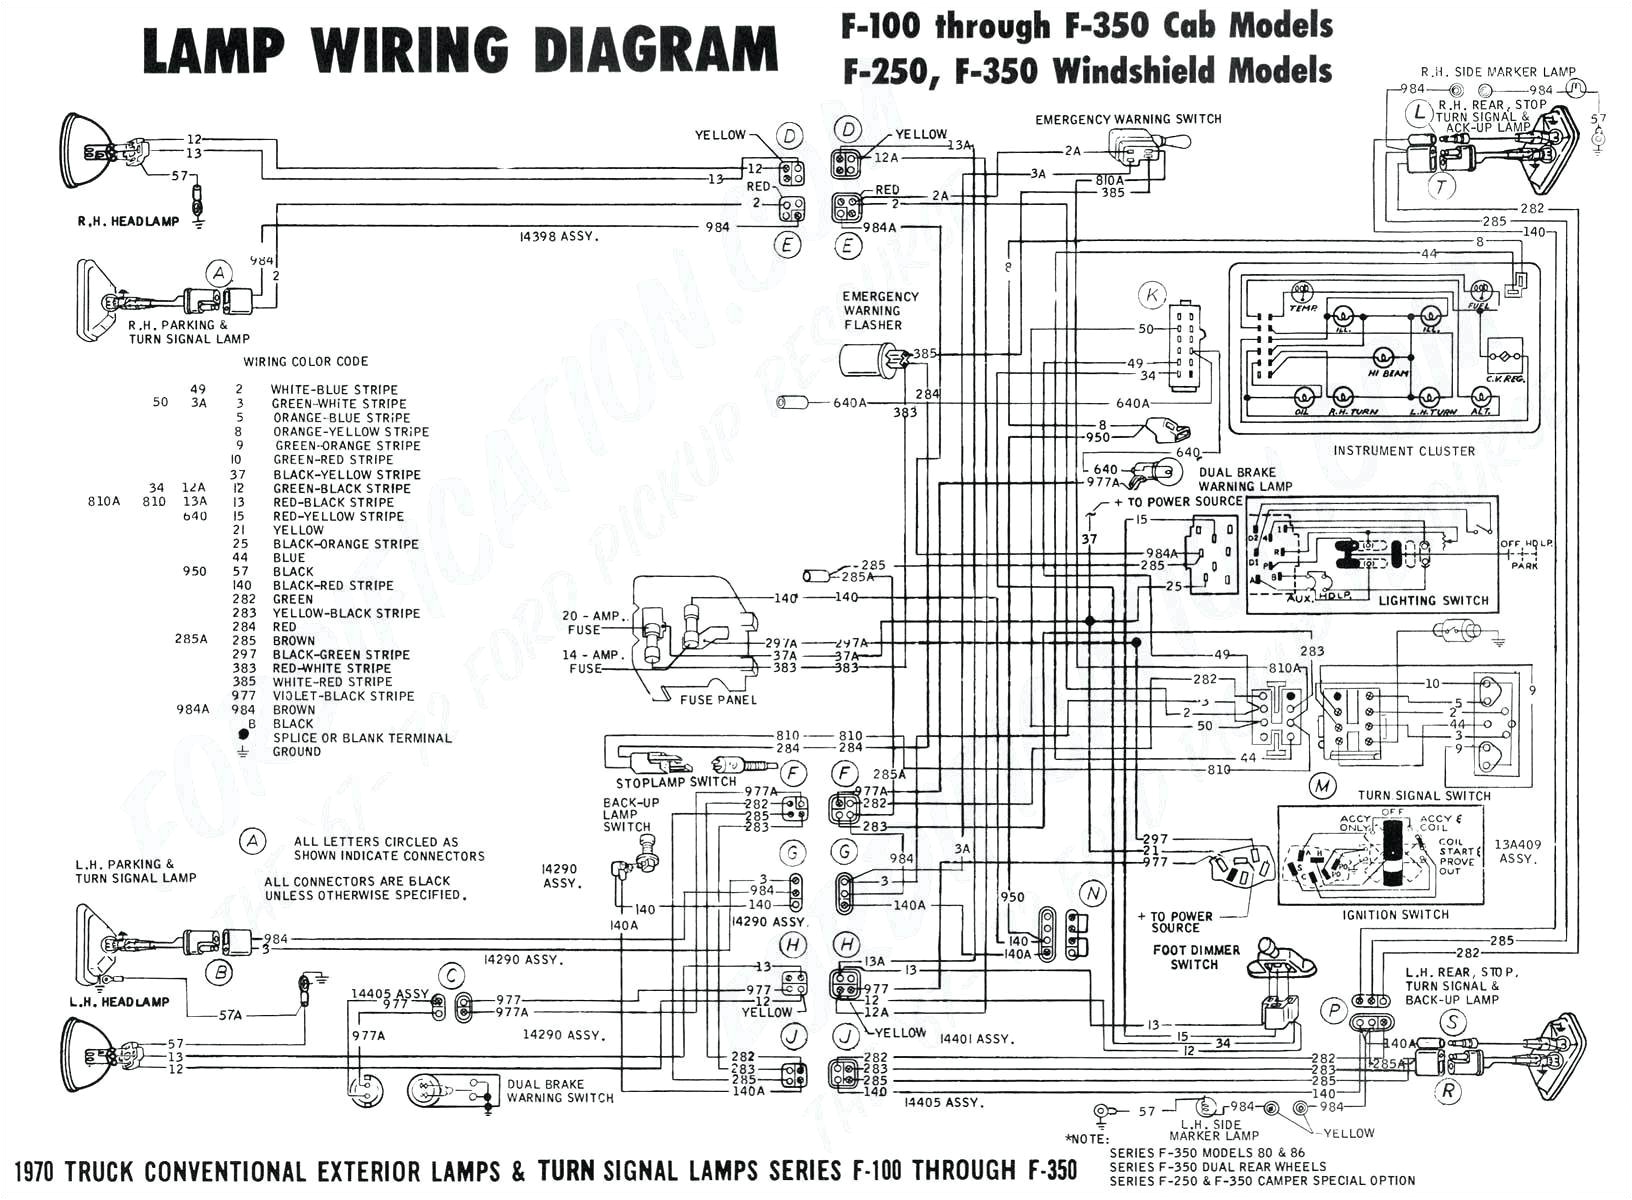 wiring a light switch and outlet together diagram free downloads wiring diagram light switch receptacle 2017 wiring diagram a light